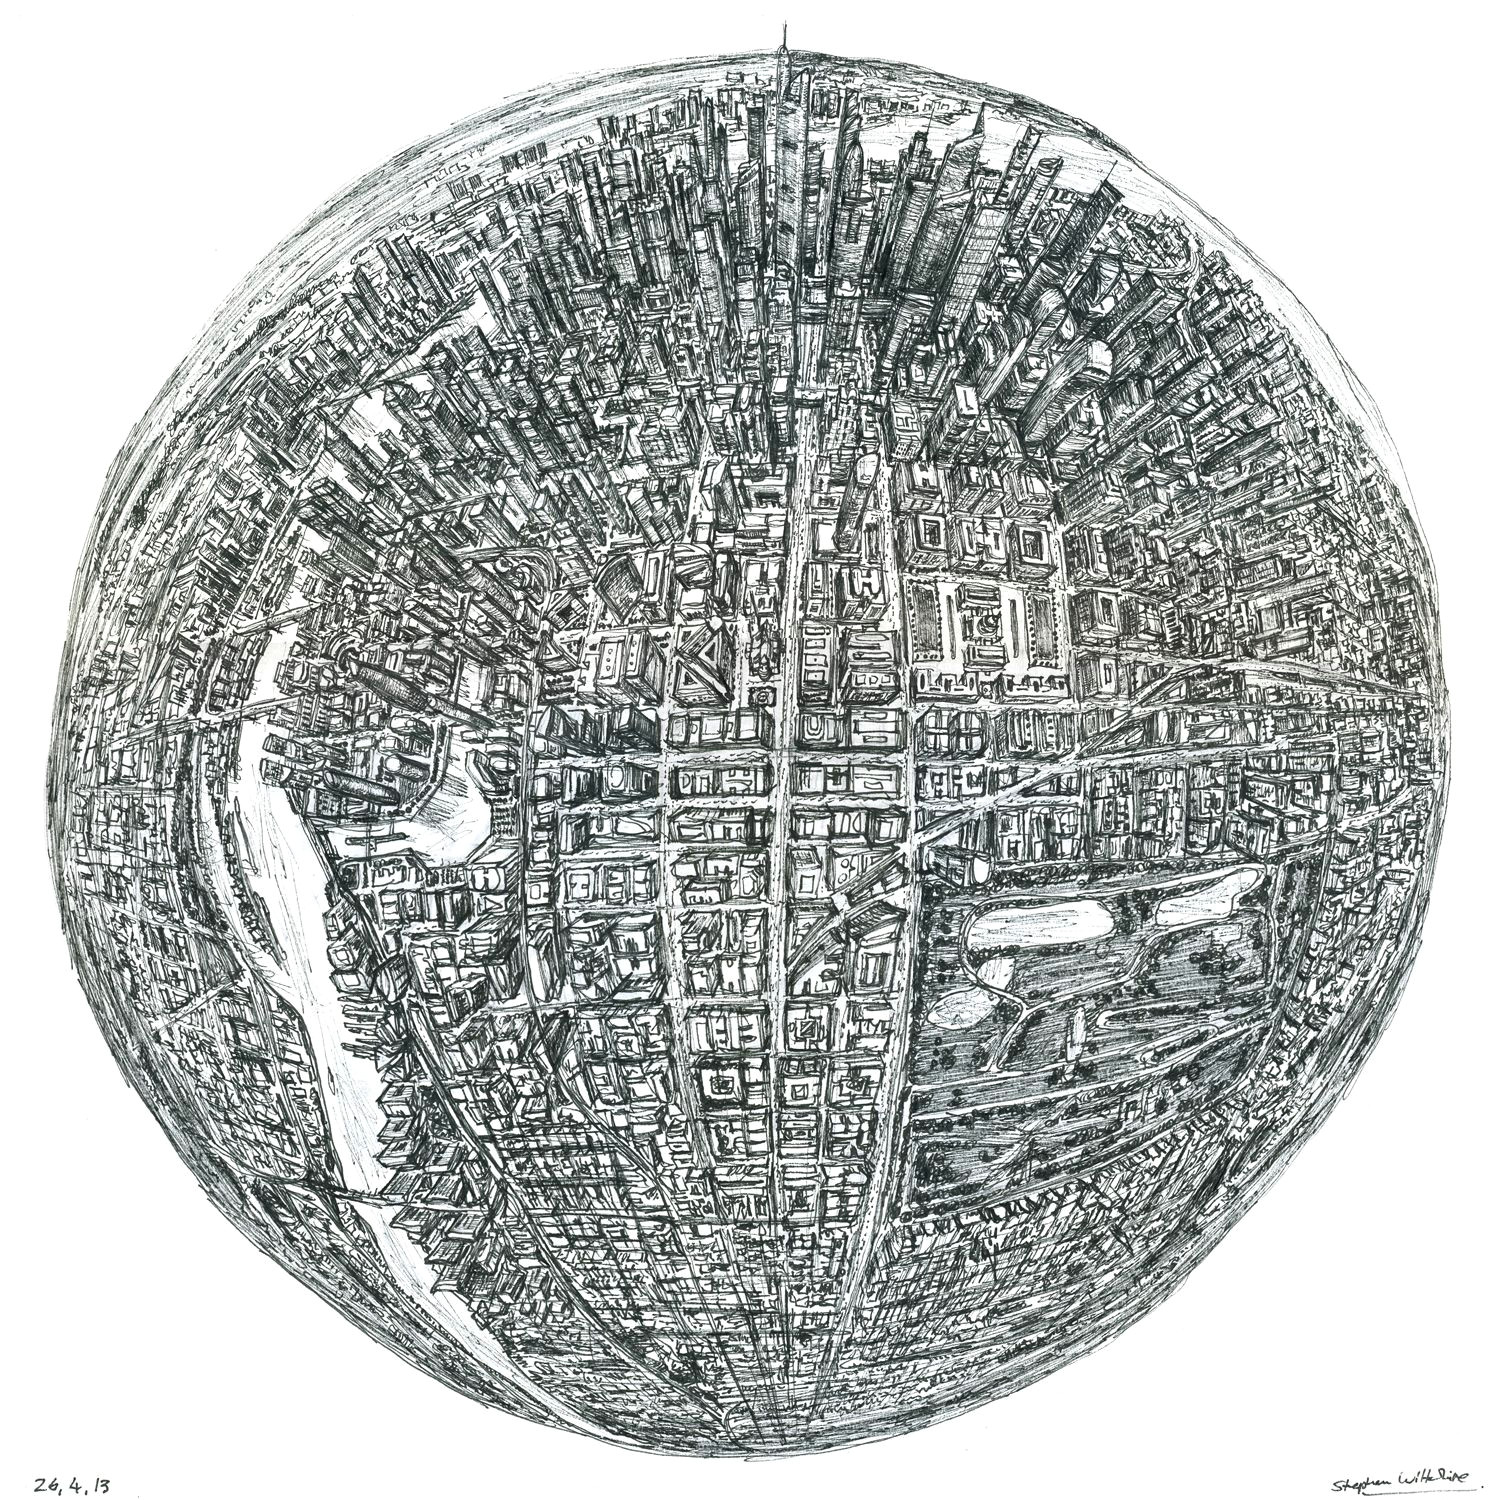 Drawing A Birds Eye View Stephen Wiltshire S New Creation Titled Globe Of Imagination is